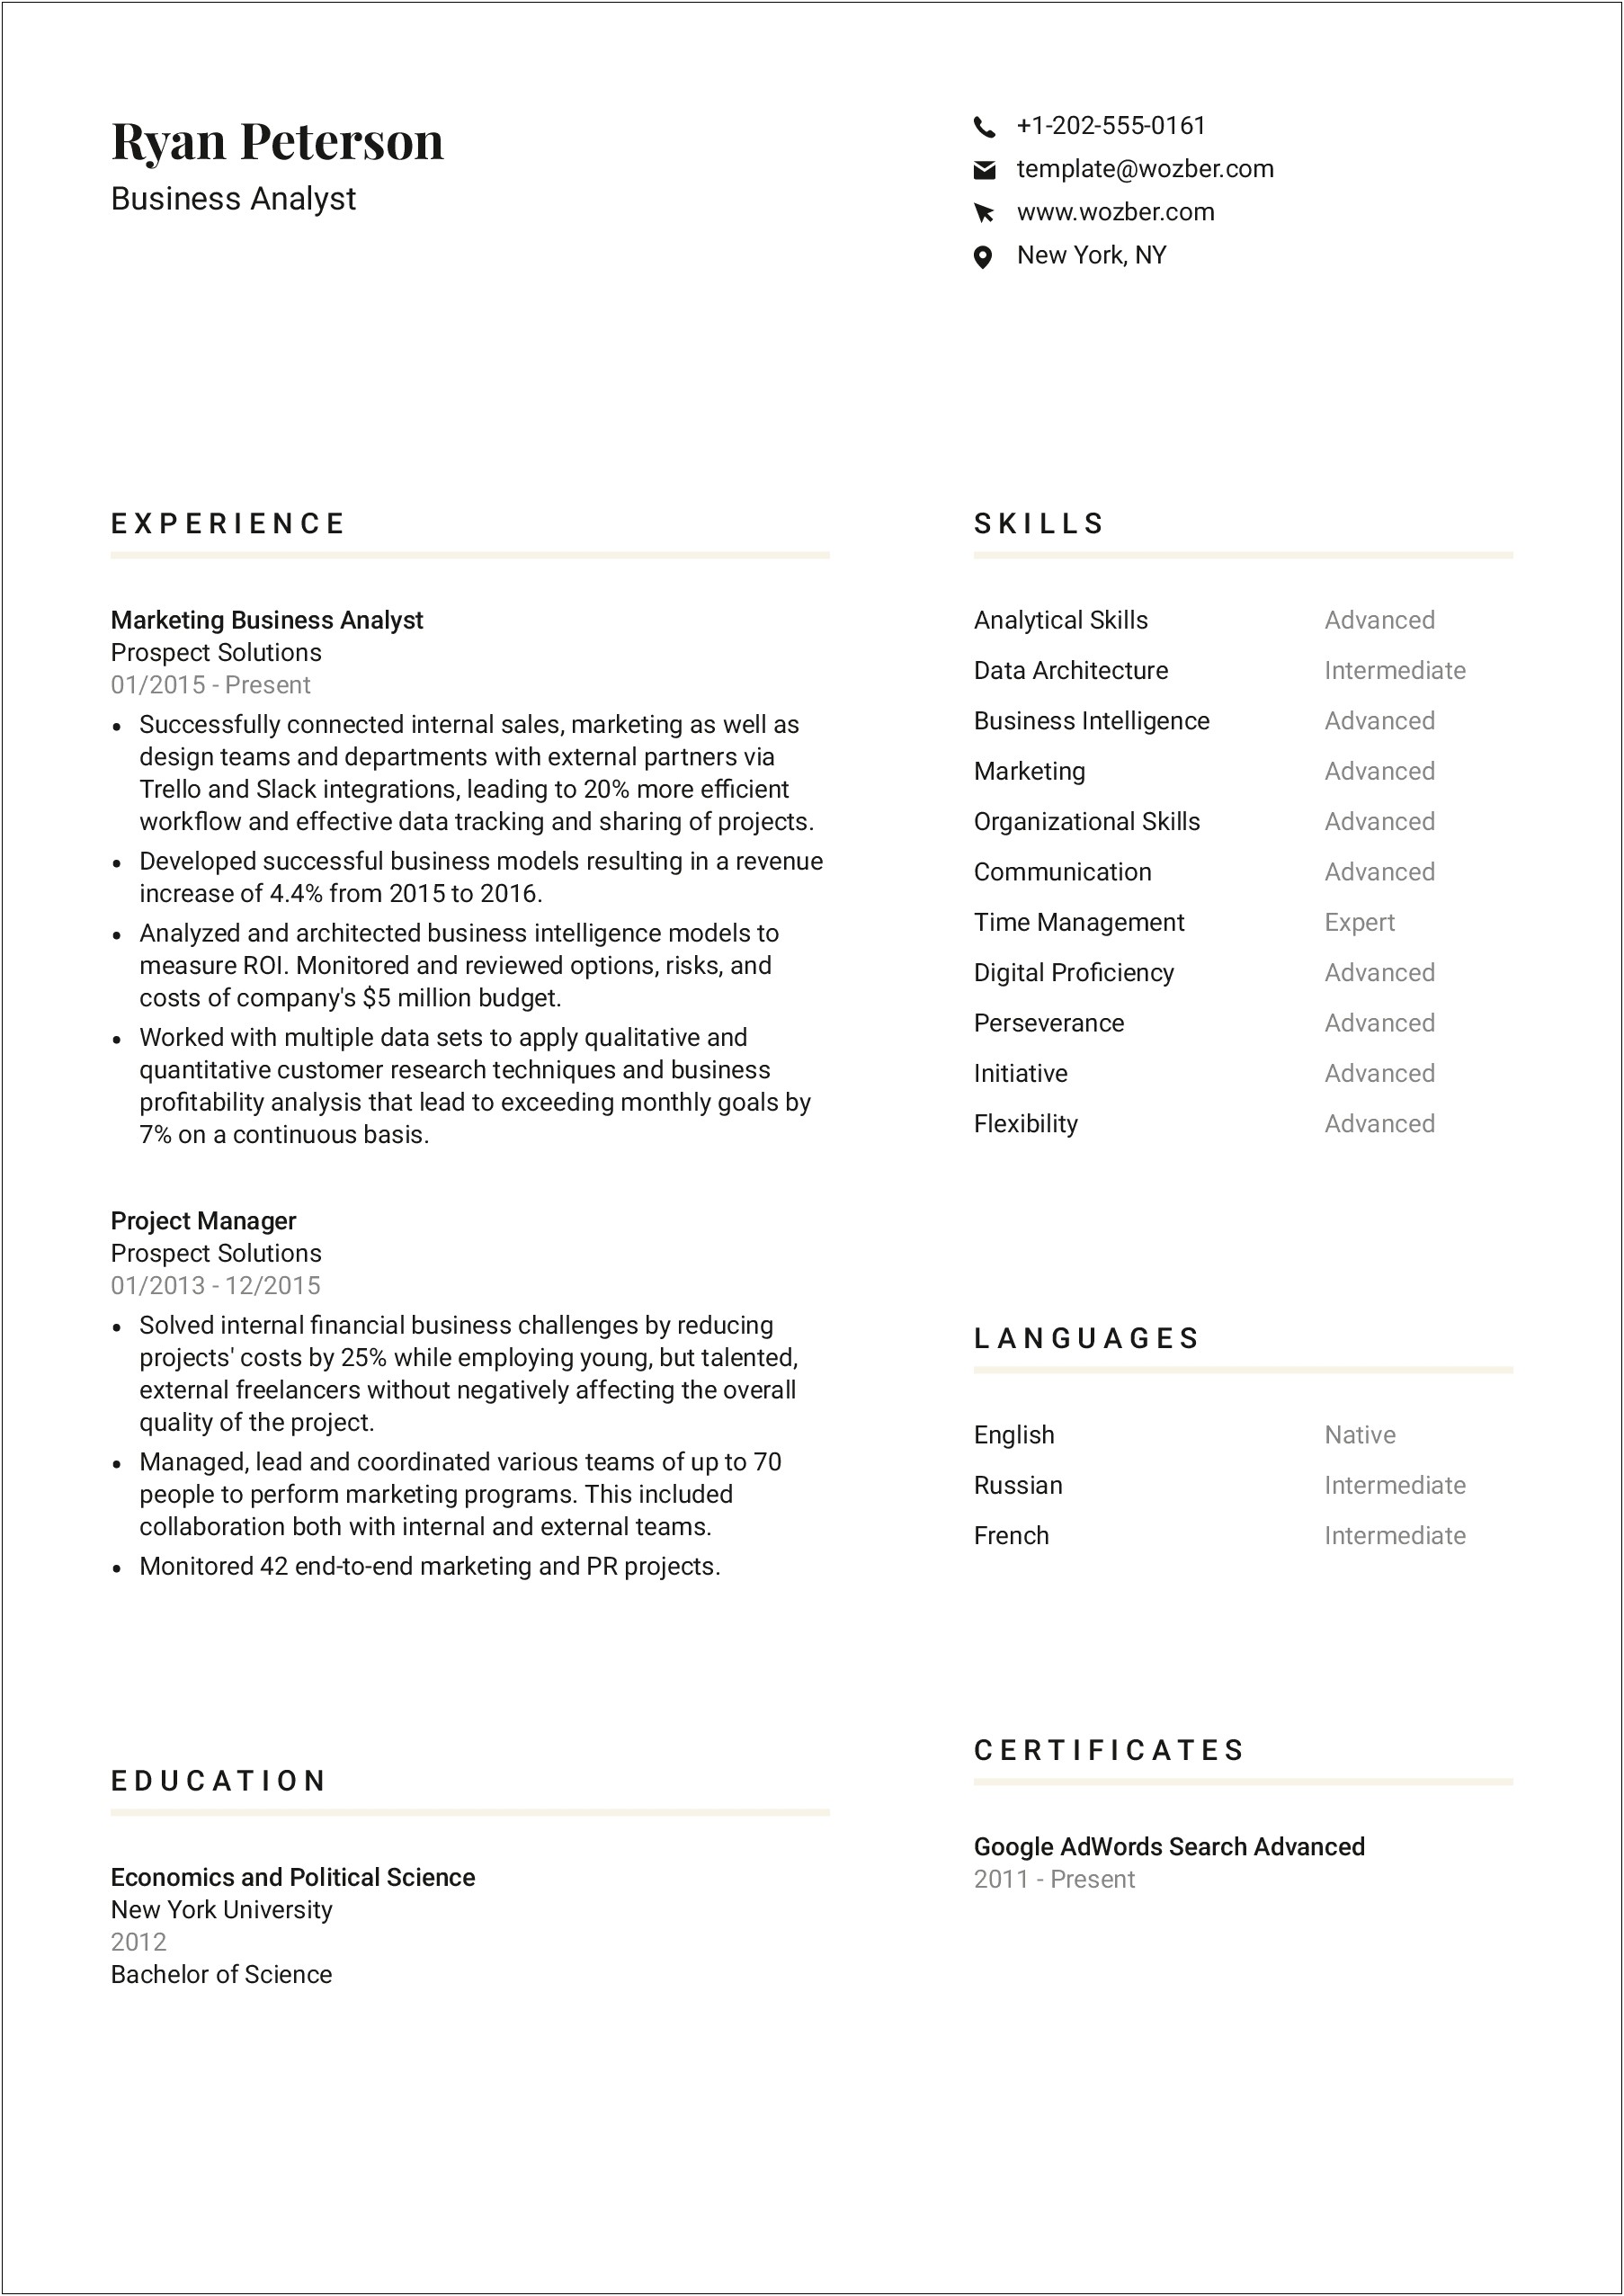 Resume Template For International Commerce And Trade Experience